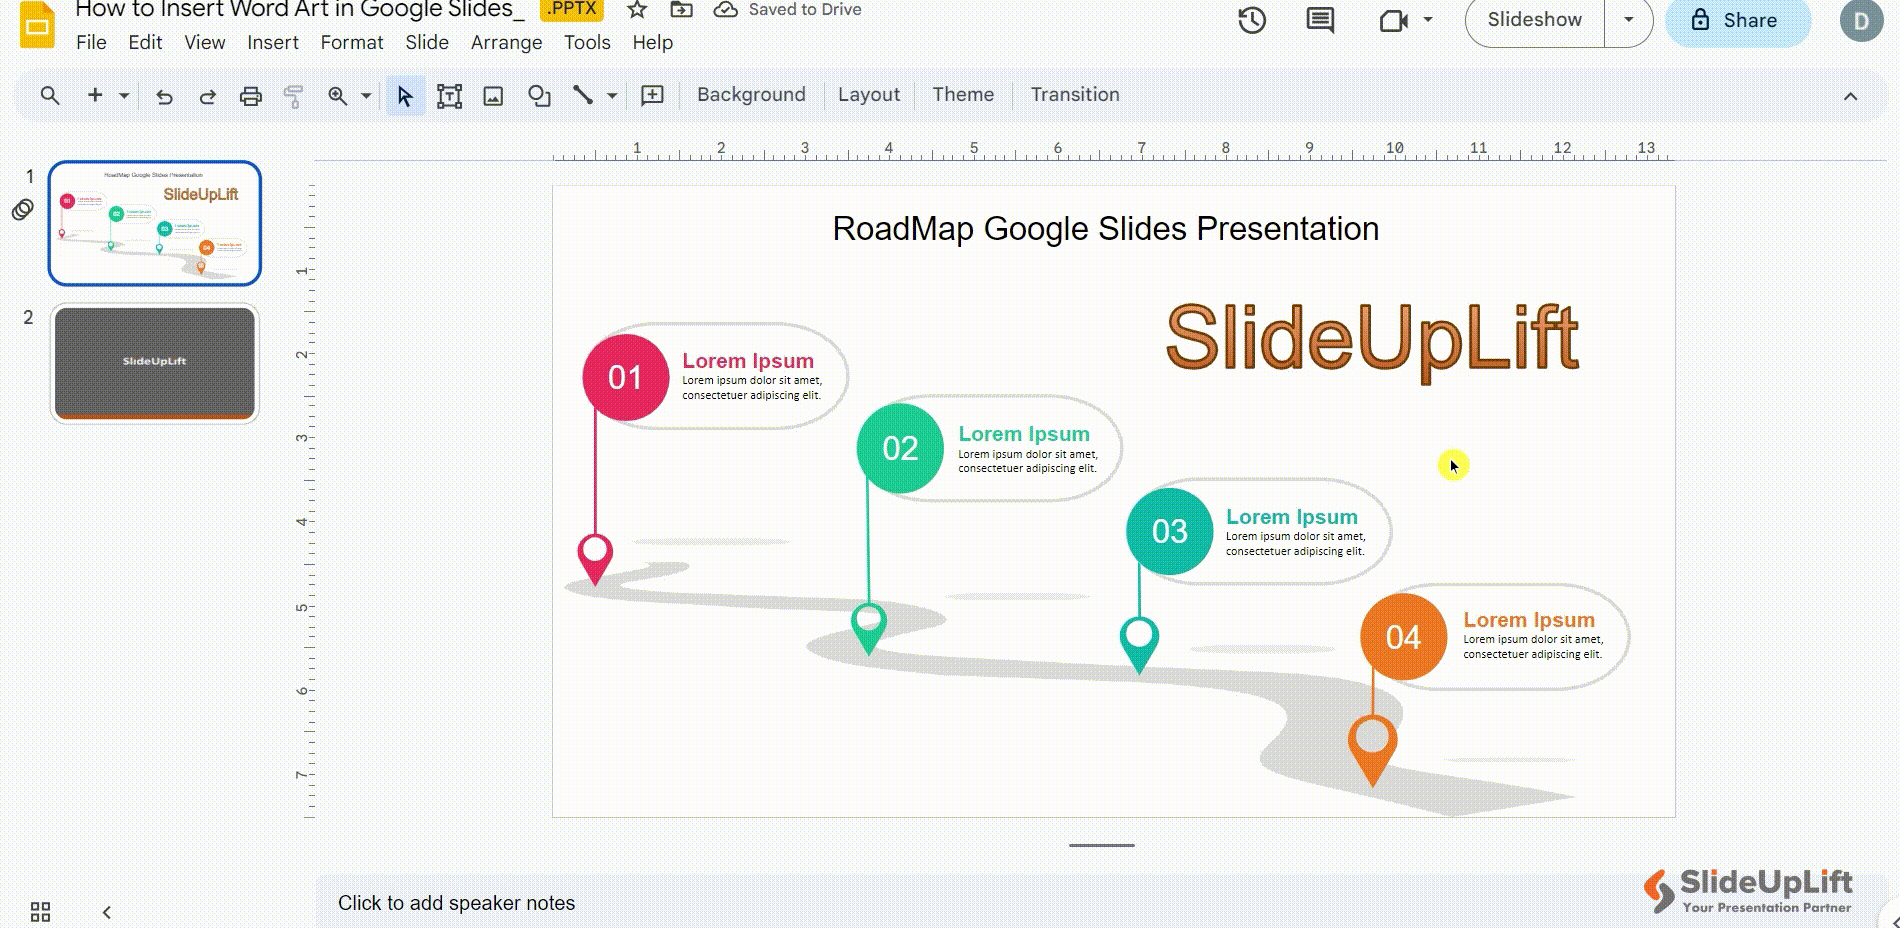 How to Add Word Art Effects in Google Slides?